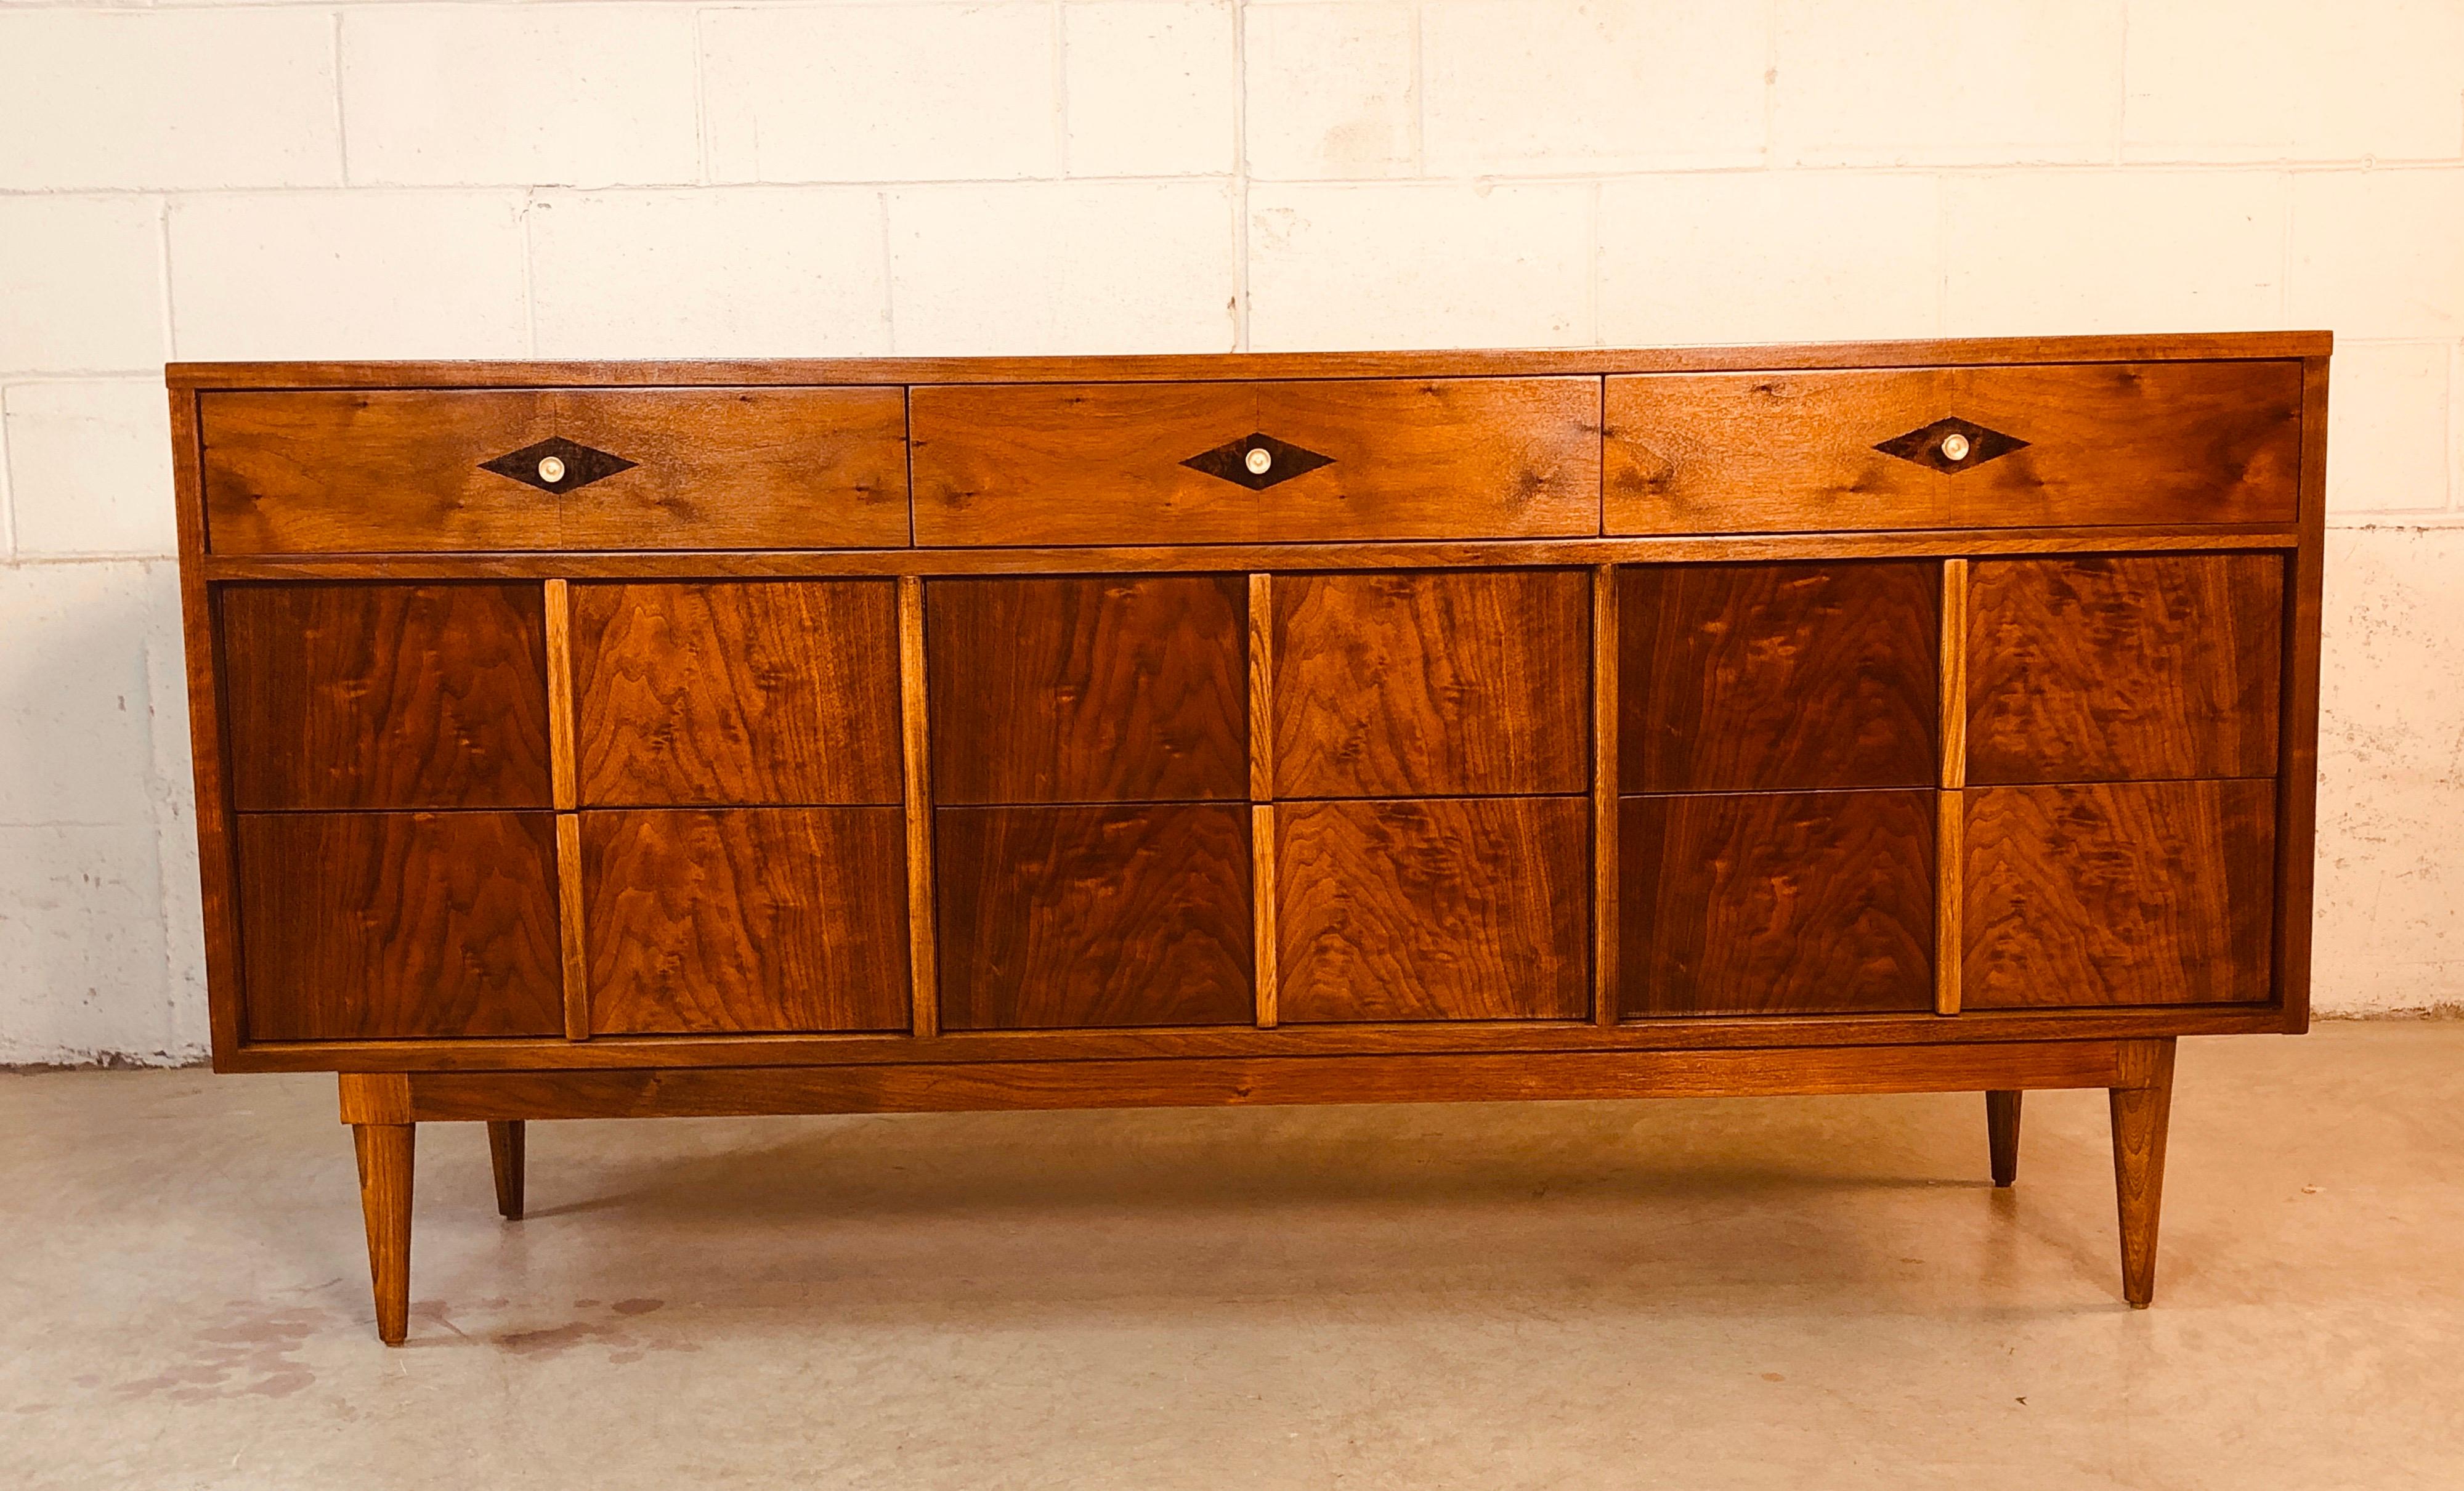 Vintage 1960s walnut and ash wood nine drawer dresser with rosewood diamond accent on the top three drawers. The dresser is made by Basic-Witz and is marked in the drawer. Excellent refinished condition.